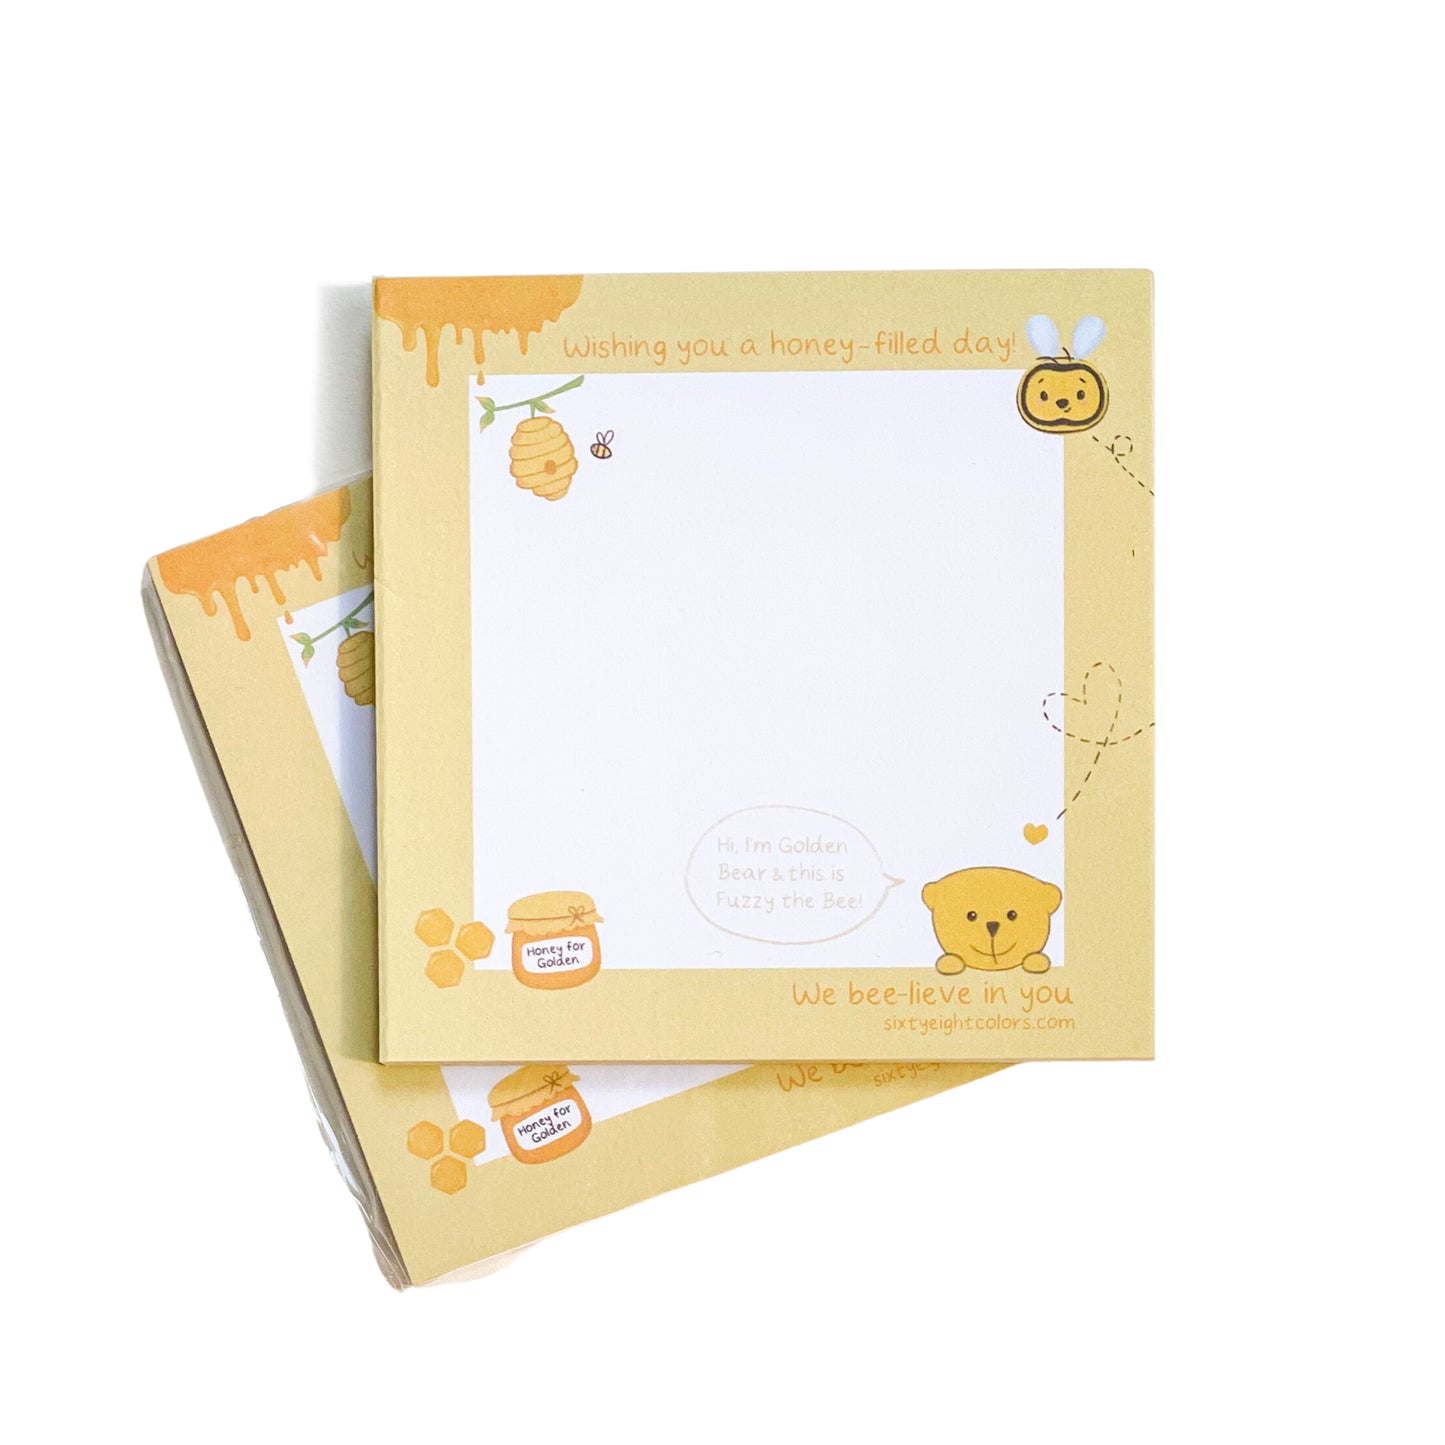 Set of 2 Notepads - 10% Off (non-sticky)